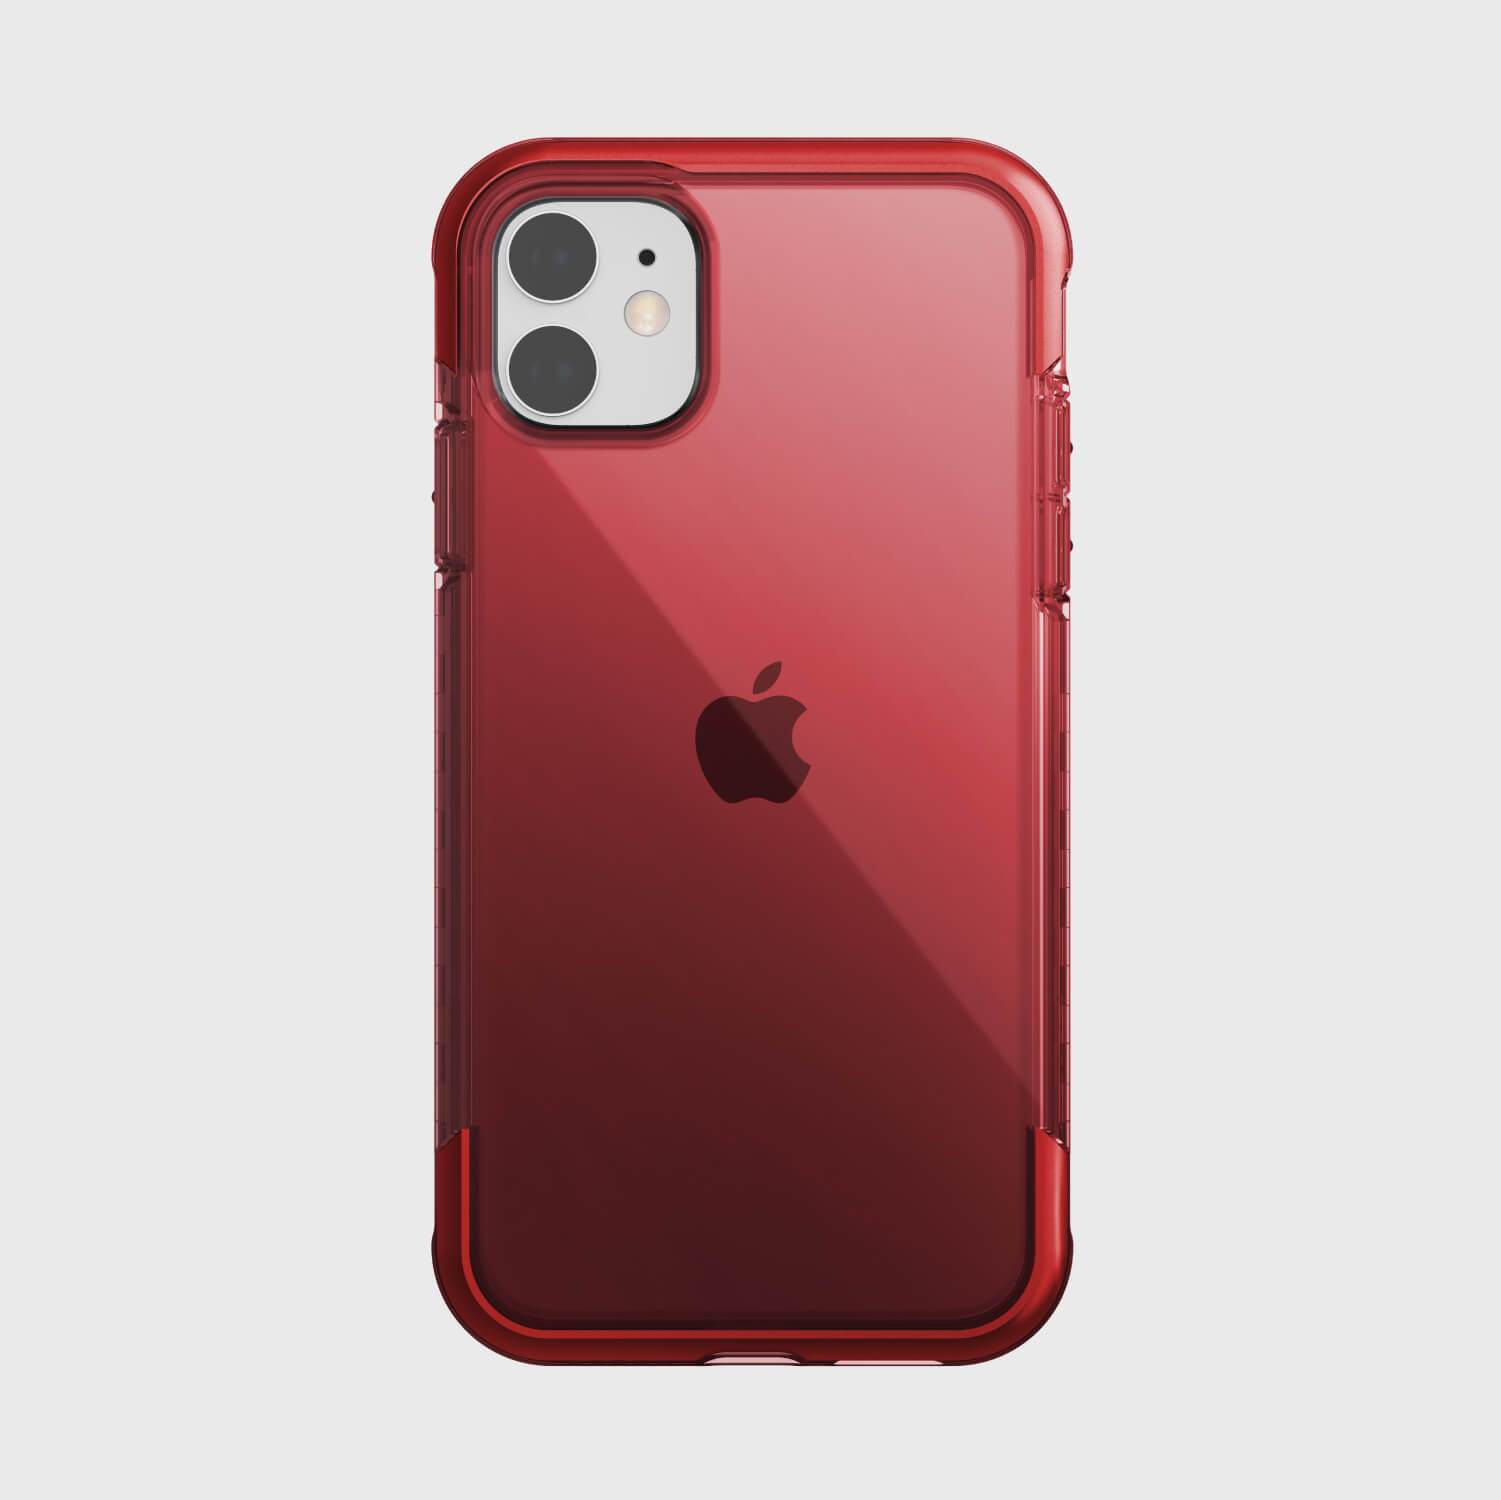 The red Raptic iPhone 11 Pro Case - AIR provides drop protection on a white background.